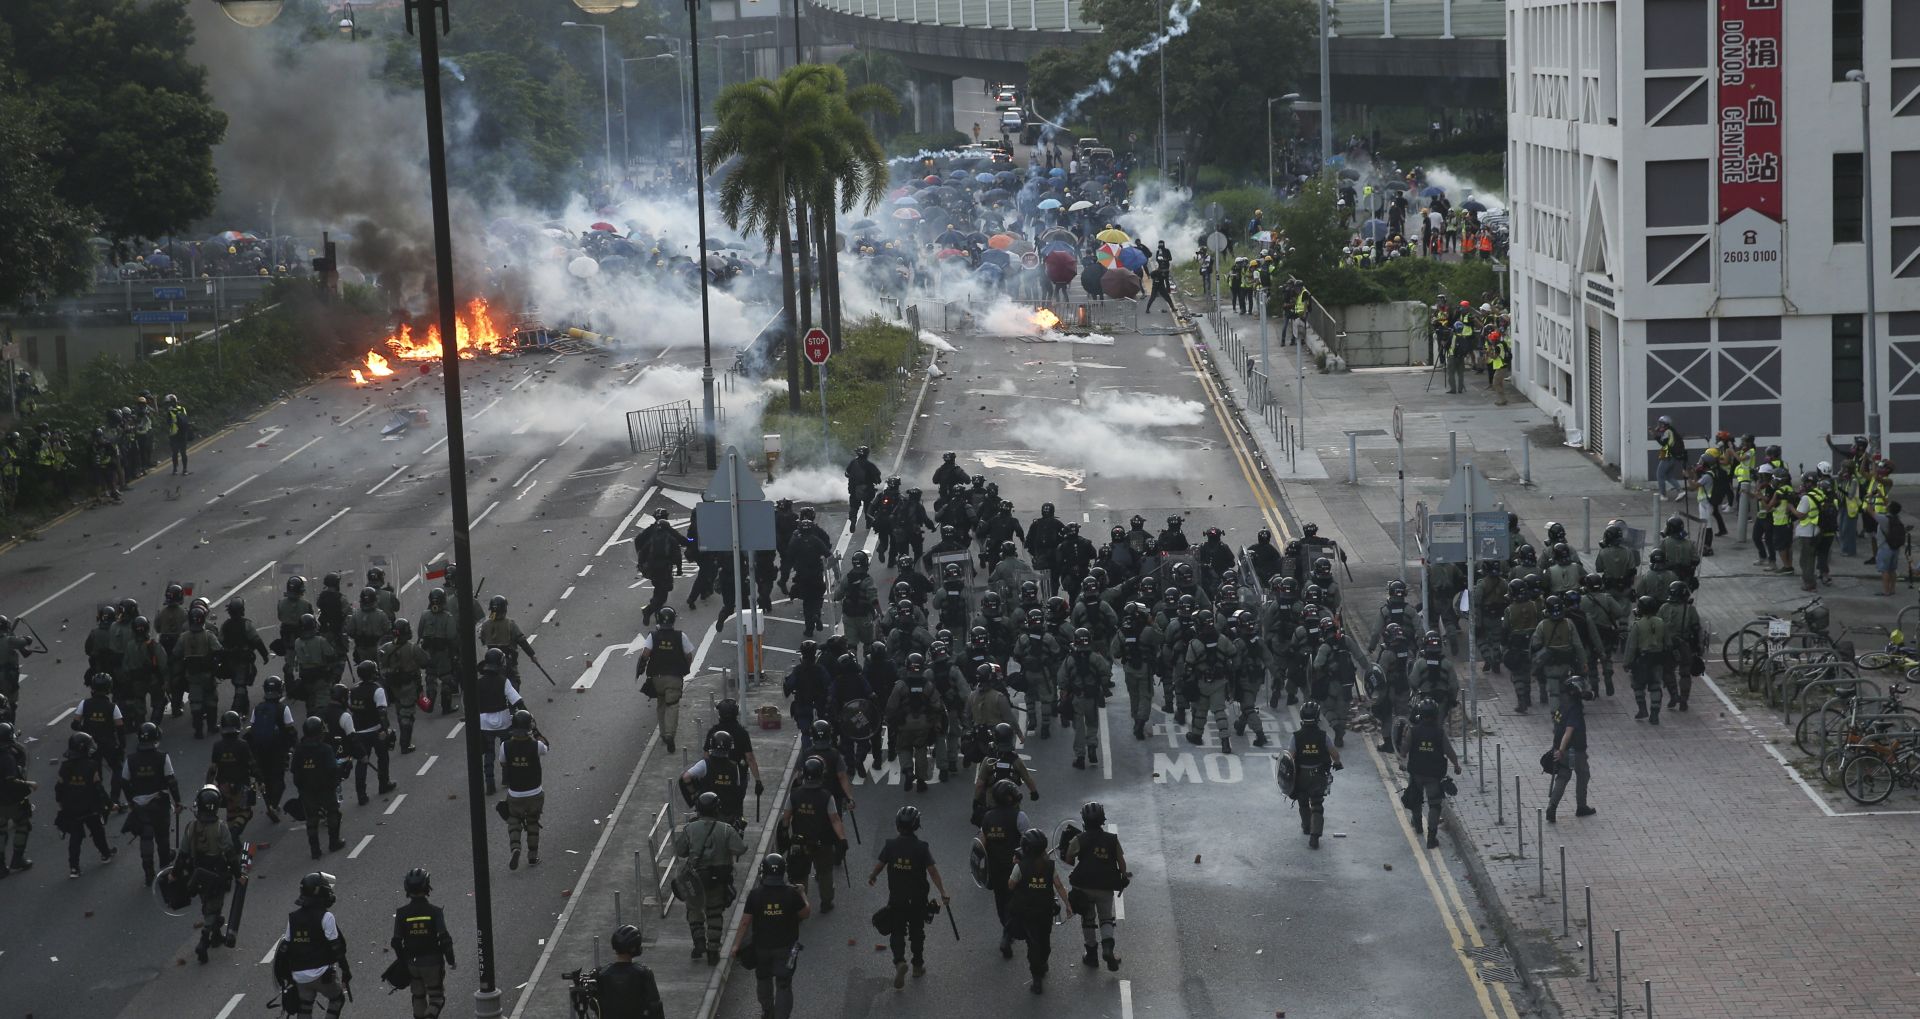 epa07885170 Police try to invade a road occupied by anti-government protesters during a protest on National Day in Hong Kong, China, 01 October 2019. Hong Kong has witnessed several months of ongoing mass protests, originally triggered by a now withdrawn extradition bill to mainland China that have turned into a wider pro-democracy movement.  EPA/JEROME FAVRE